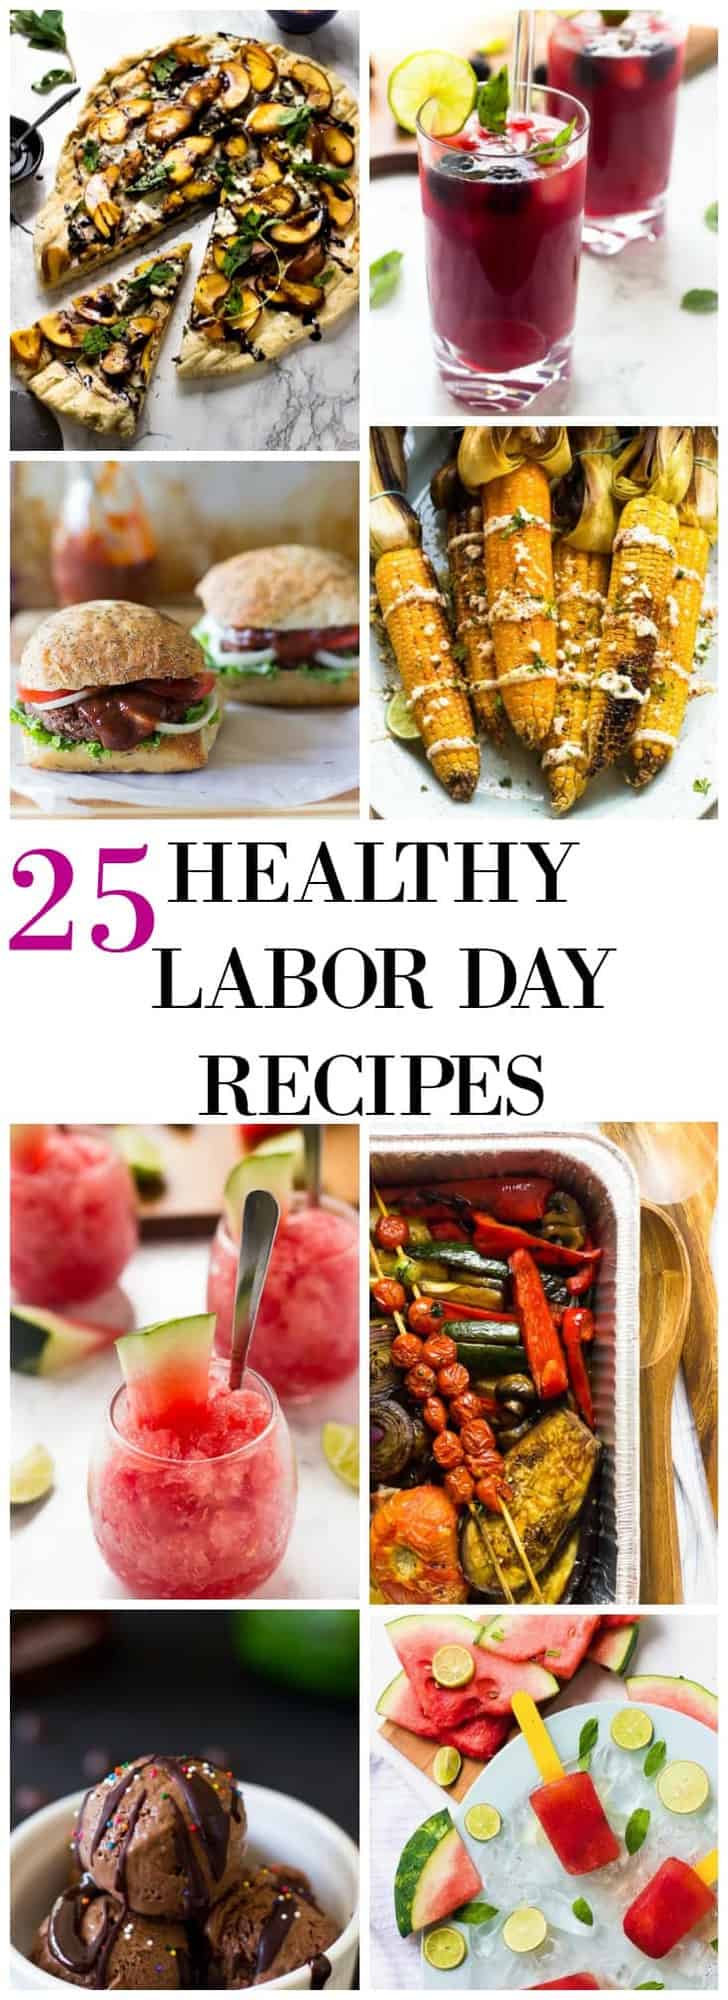 Montage of healthy labor day dishes.